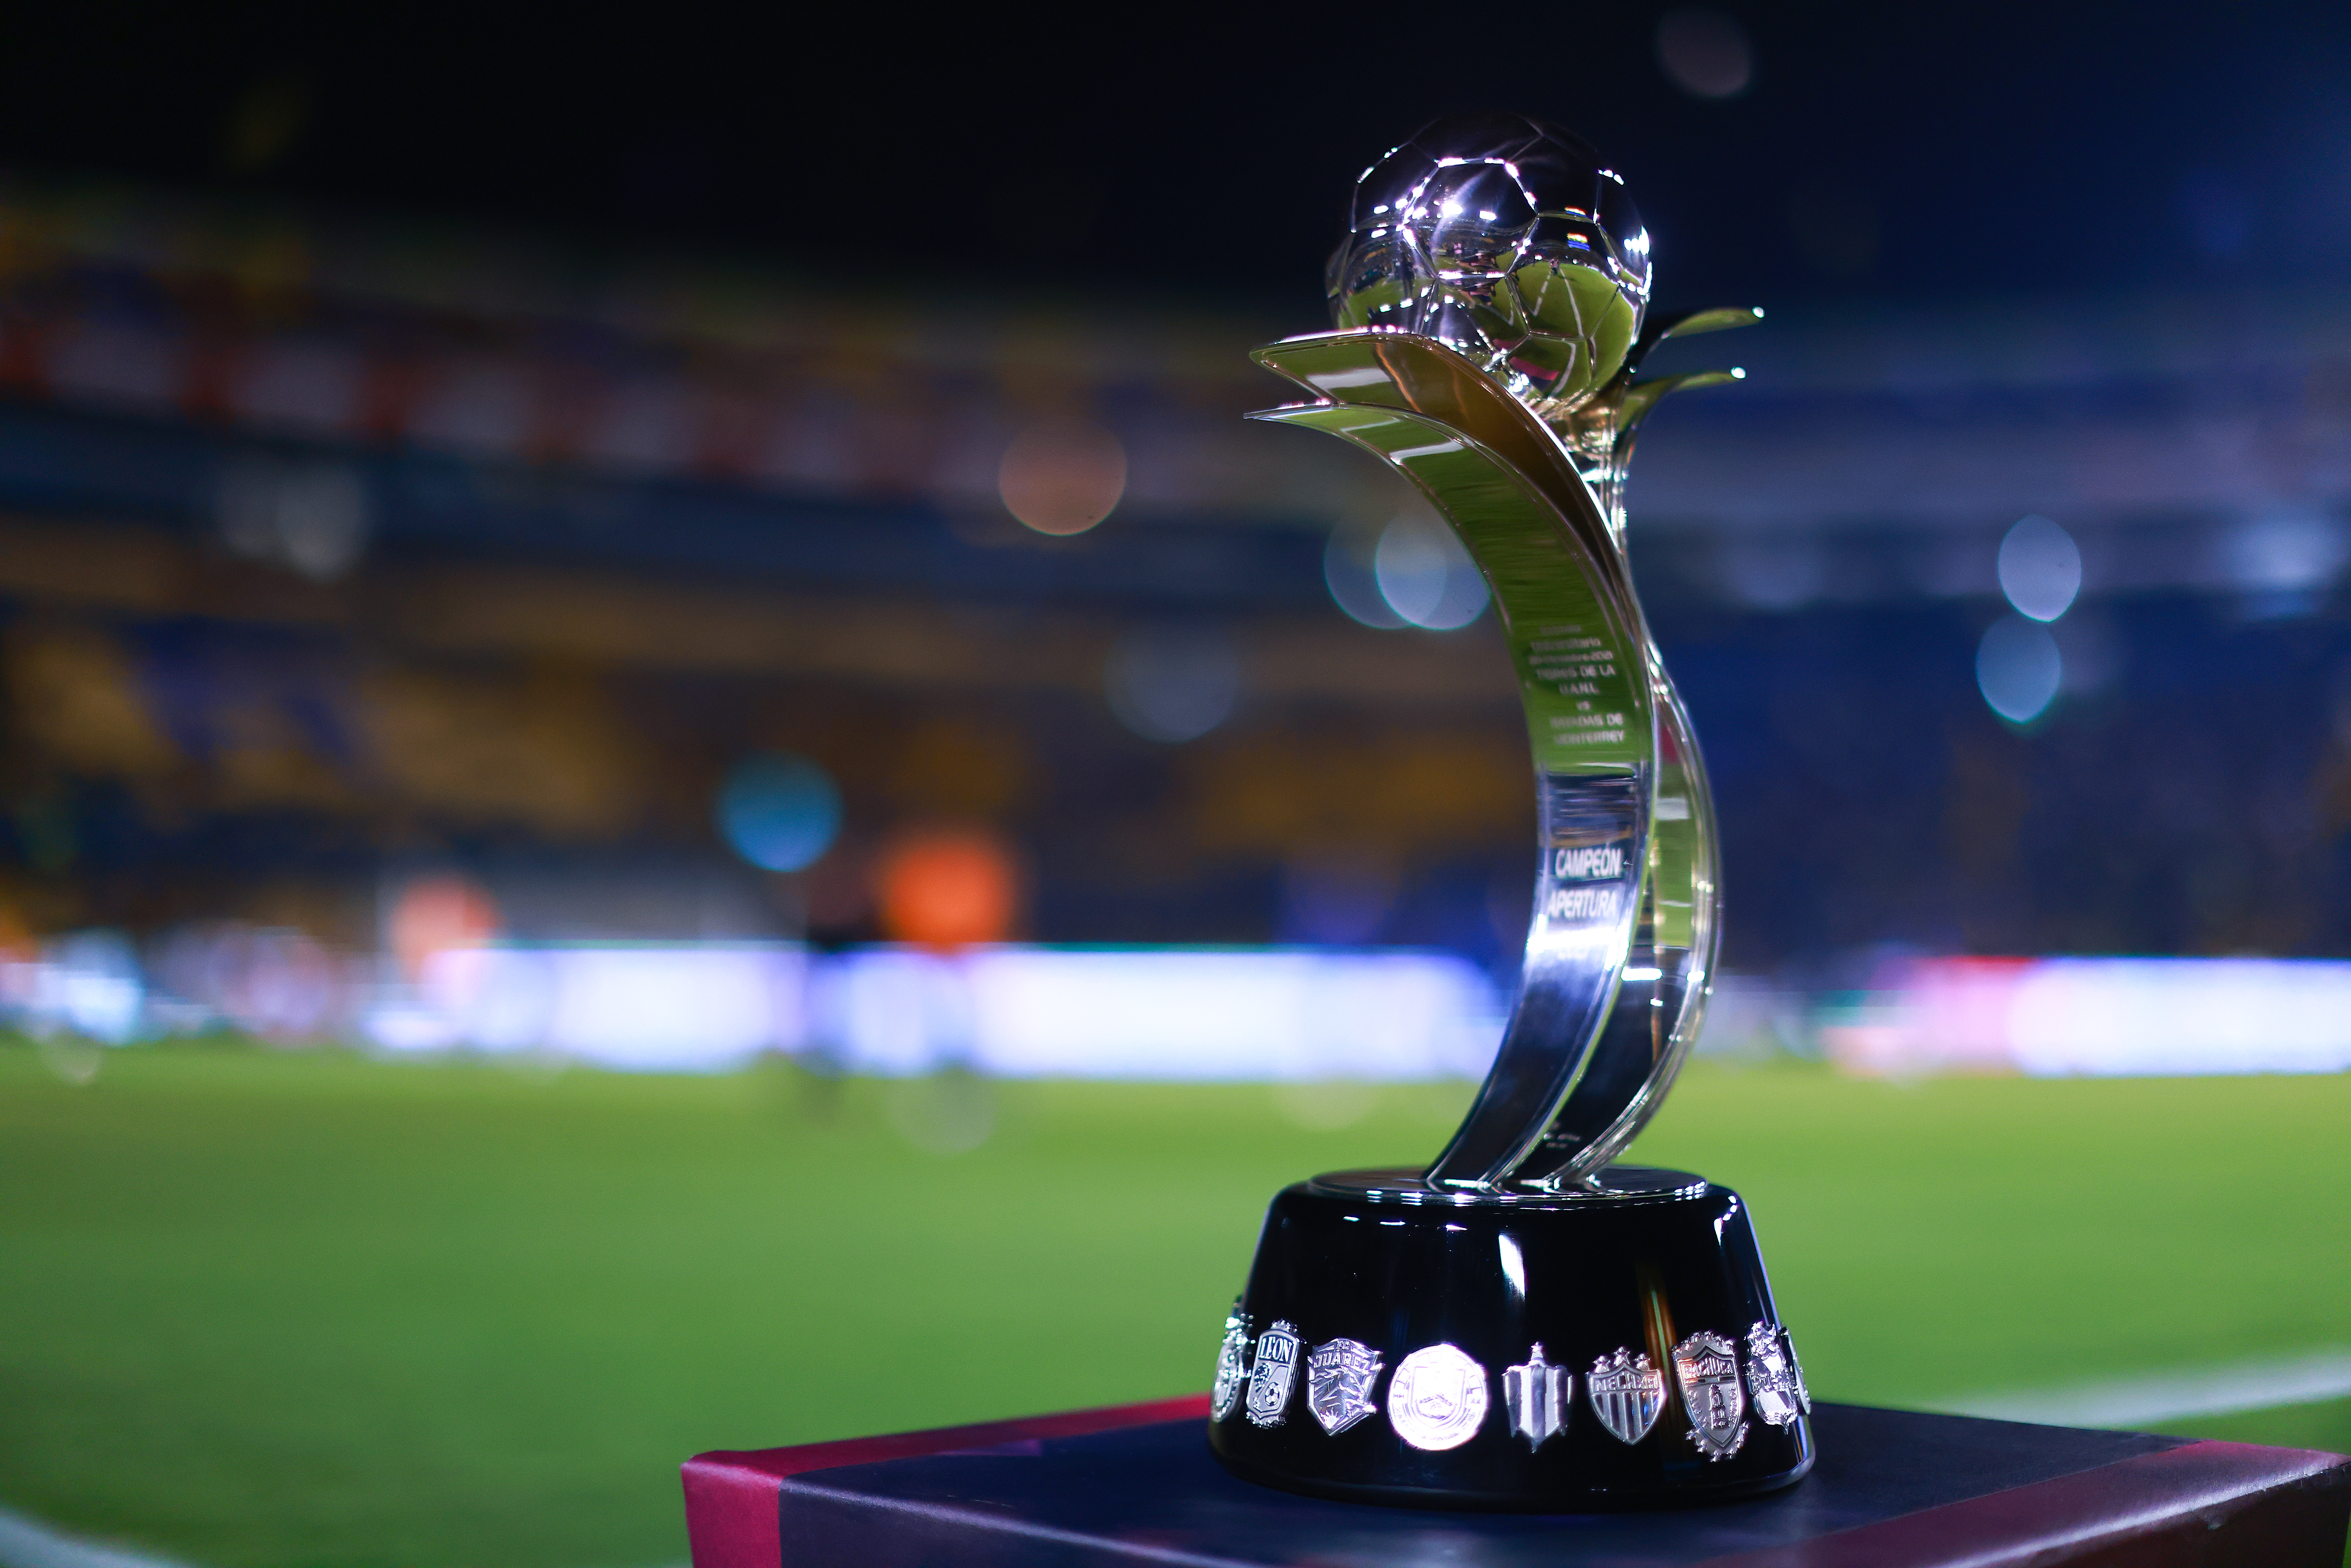 Detail view of the Trophy of Torneo Grita Mexico A21 Liga MX Femenil prior the final second leg match between Tigres UANL and Monterrey as part of the Torneo Grita Mexico A21 Liga MX Femenil at Universitario Stadium on December 20, 2021 in Monterrey, Mexico.